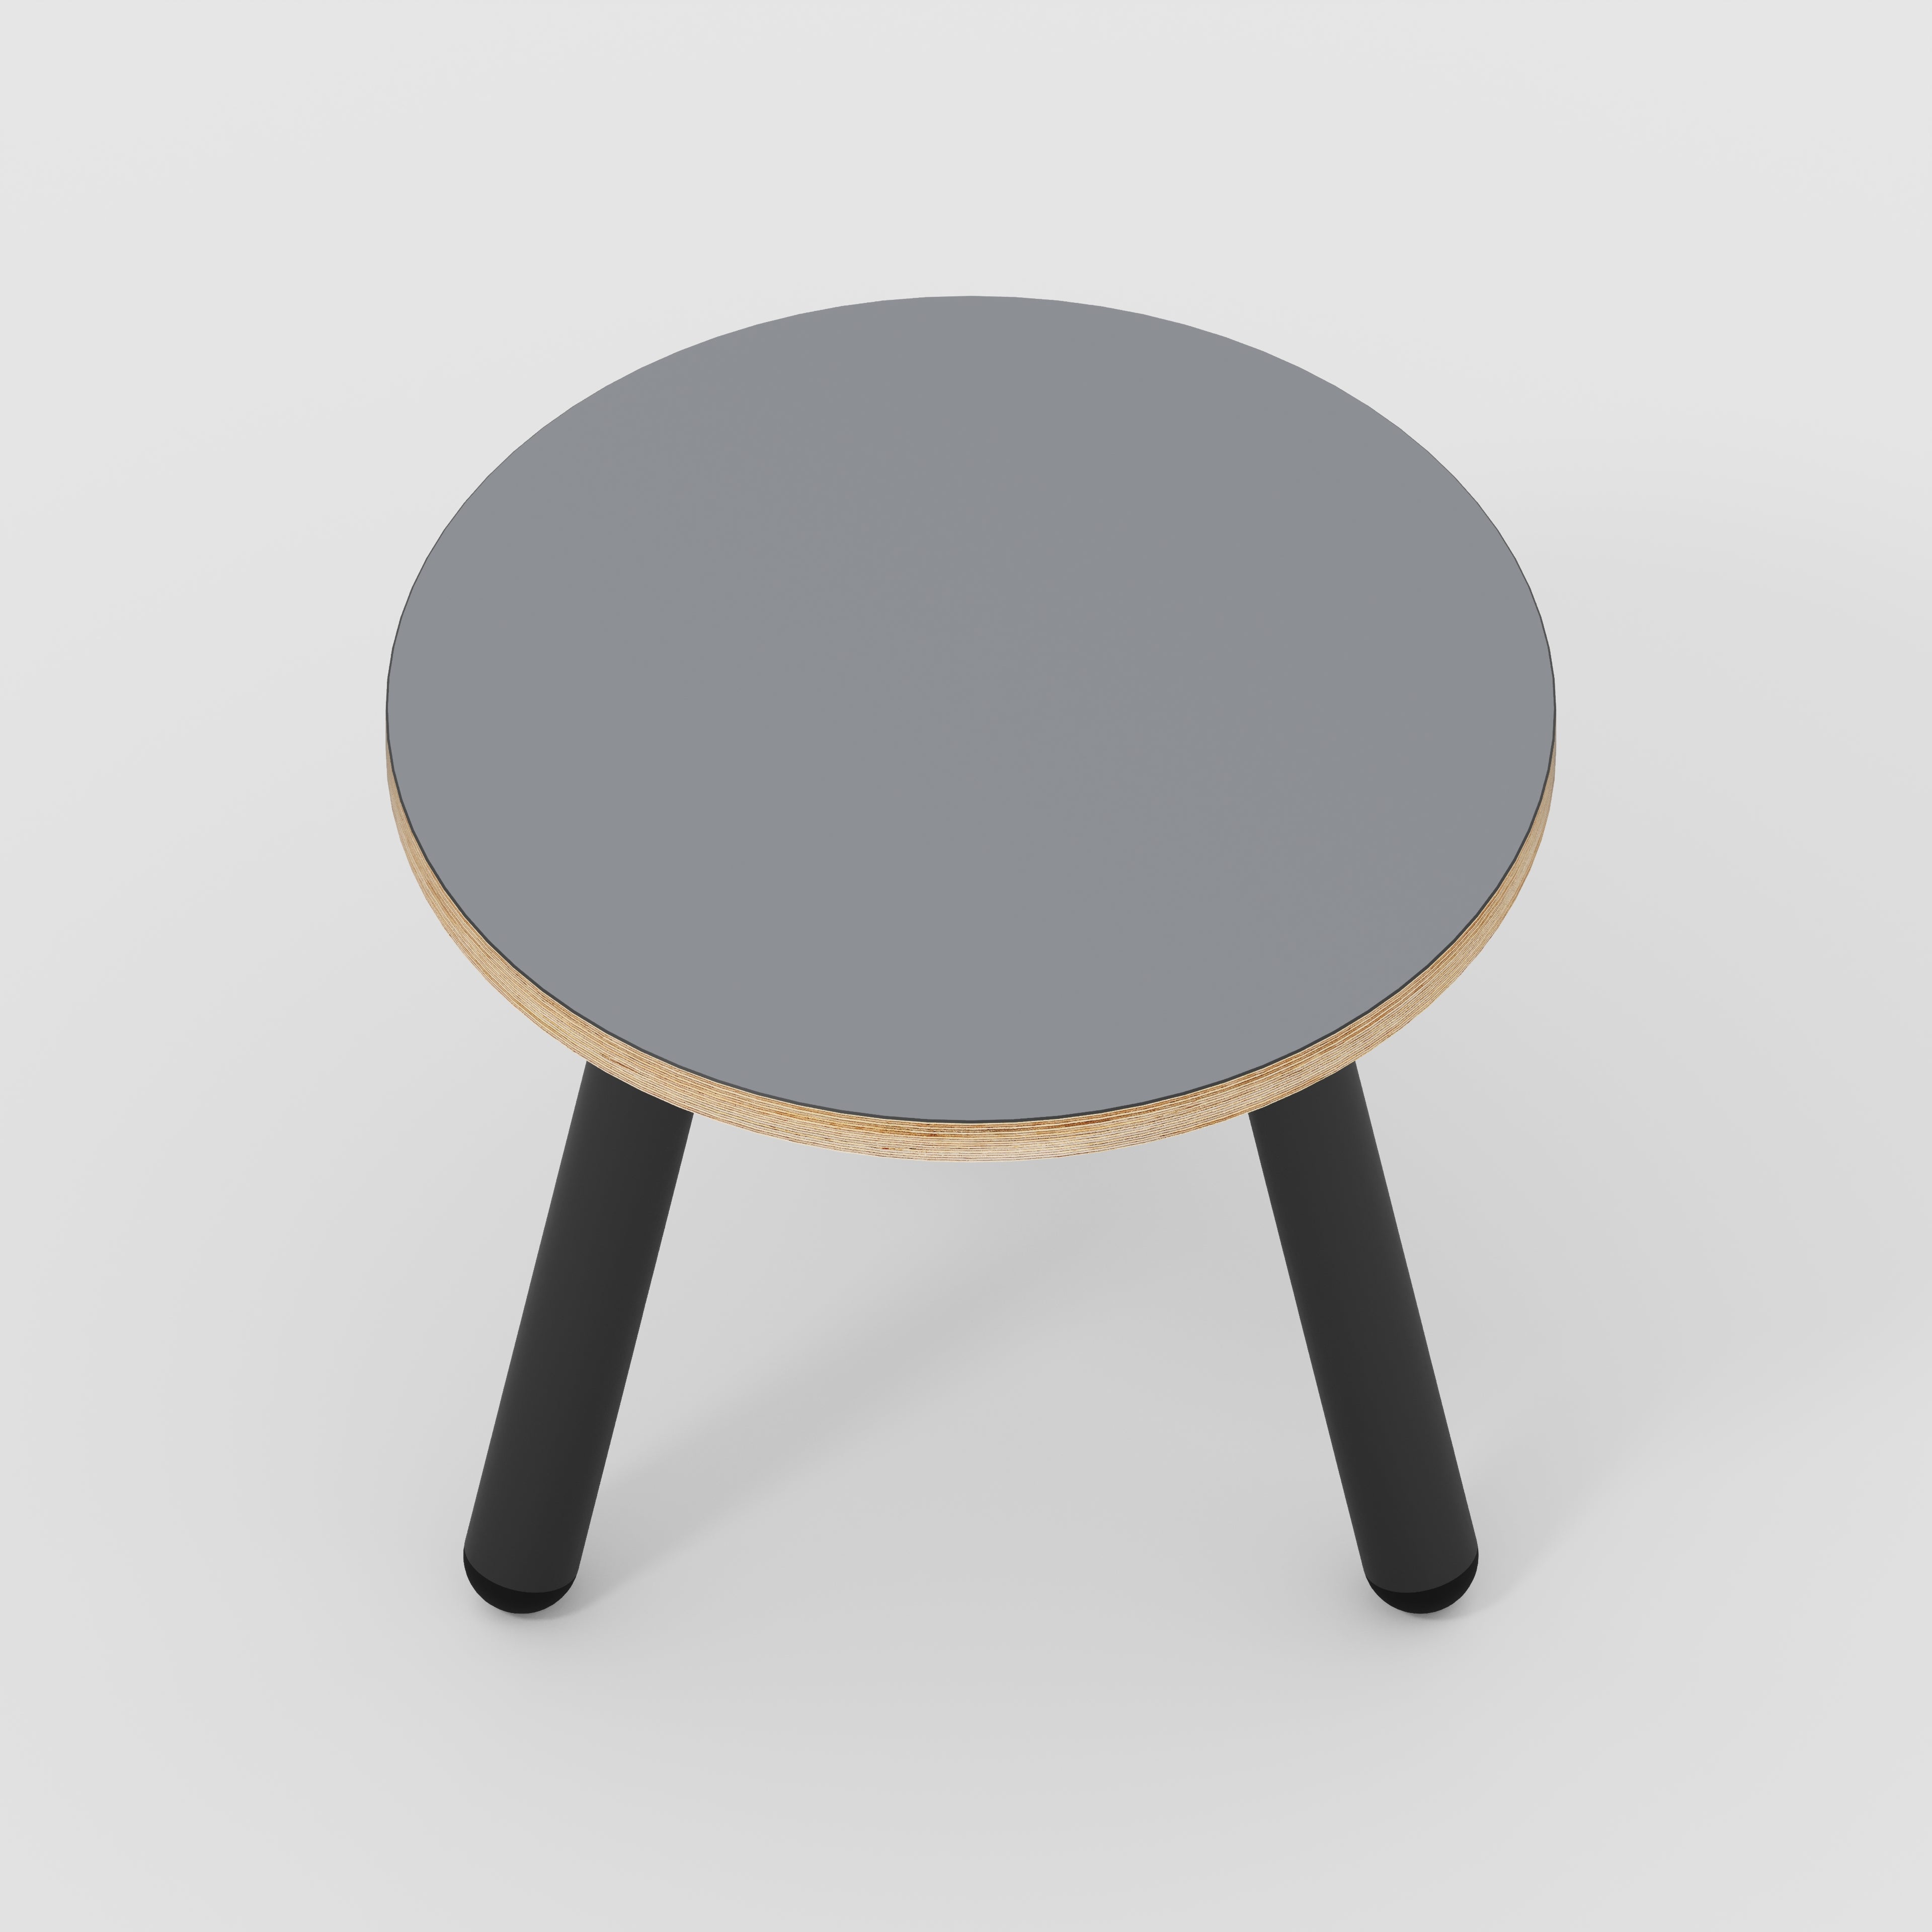 Round Side Table with Black Round Single Pin Legs - Formica Tornado Grey - 500(w) x 500(d) x 425(h)